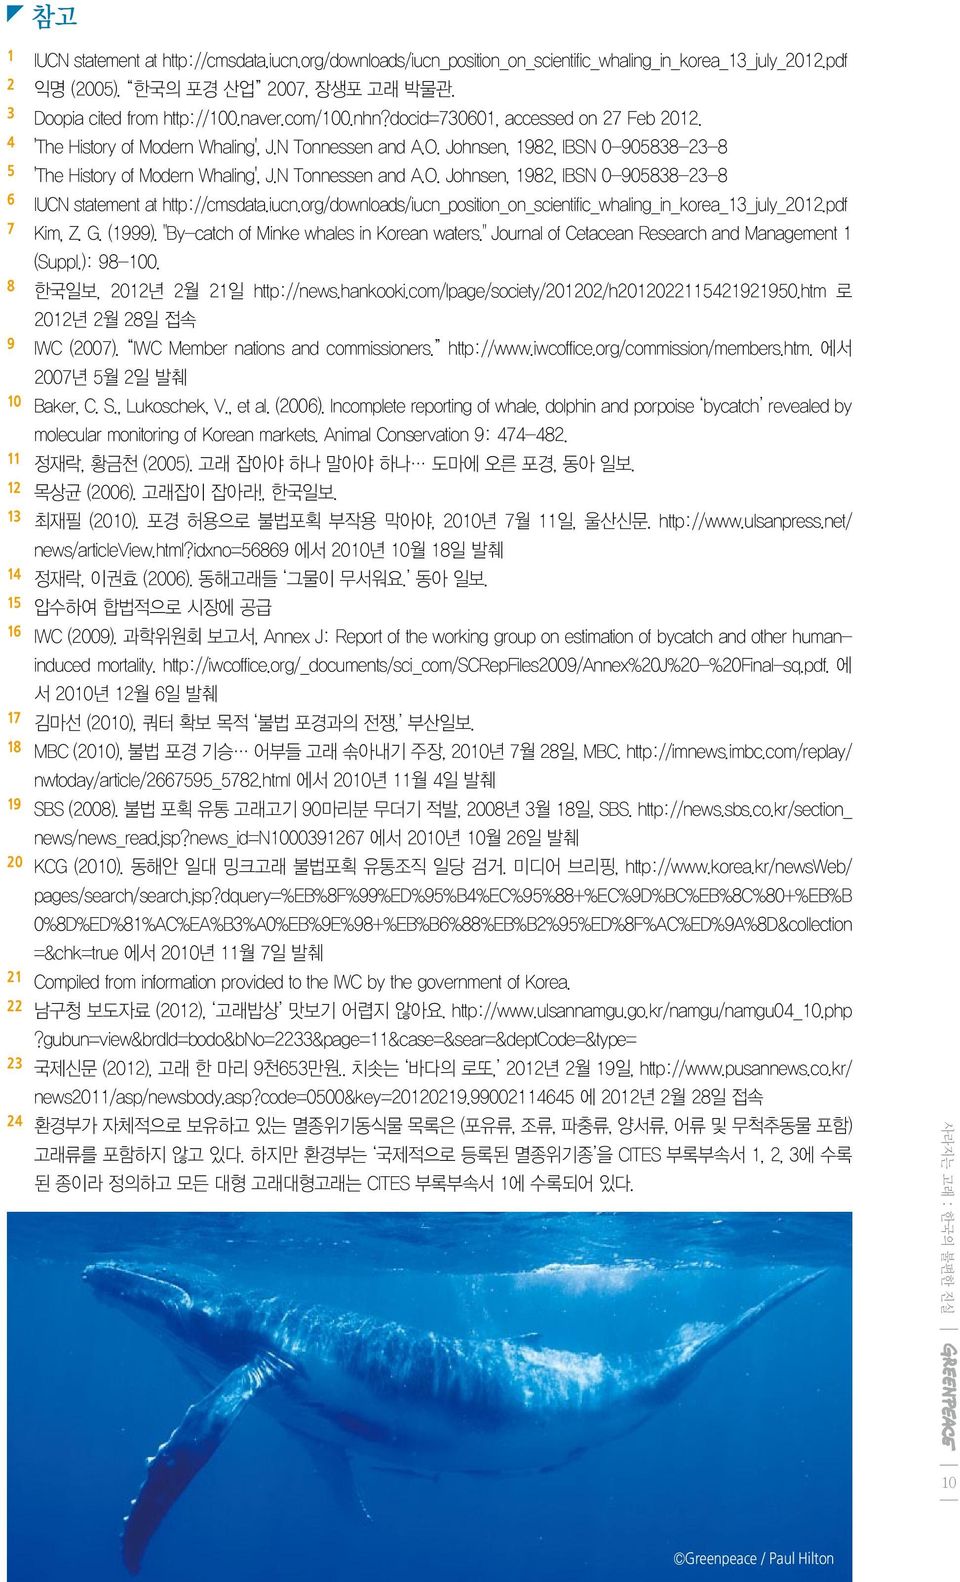 iucn.org/downloads/iucn_position_on_scientific_whaling_in_korea_13_july_2012.pdf 7 Kim, Z. G. (1999). "By-catch of Minke whales in Korean waters." Journal of Cetacean Research and Management 1 (Suppl.